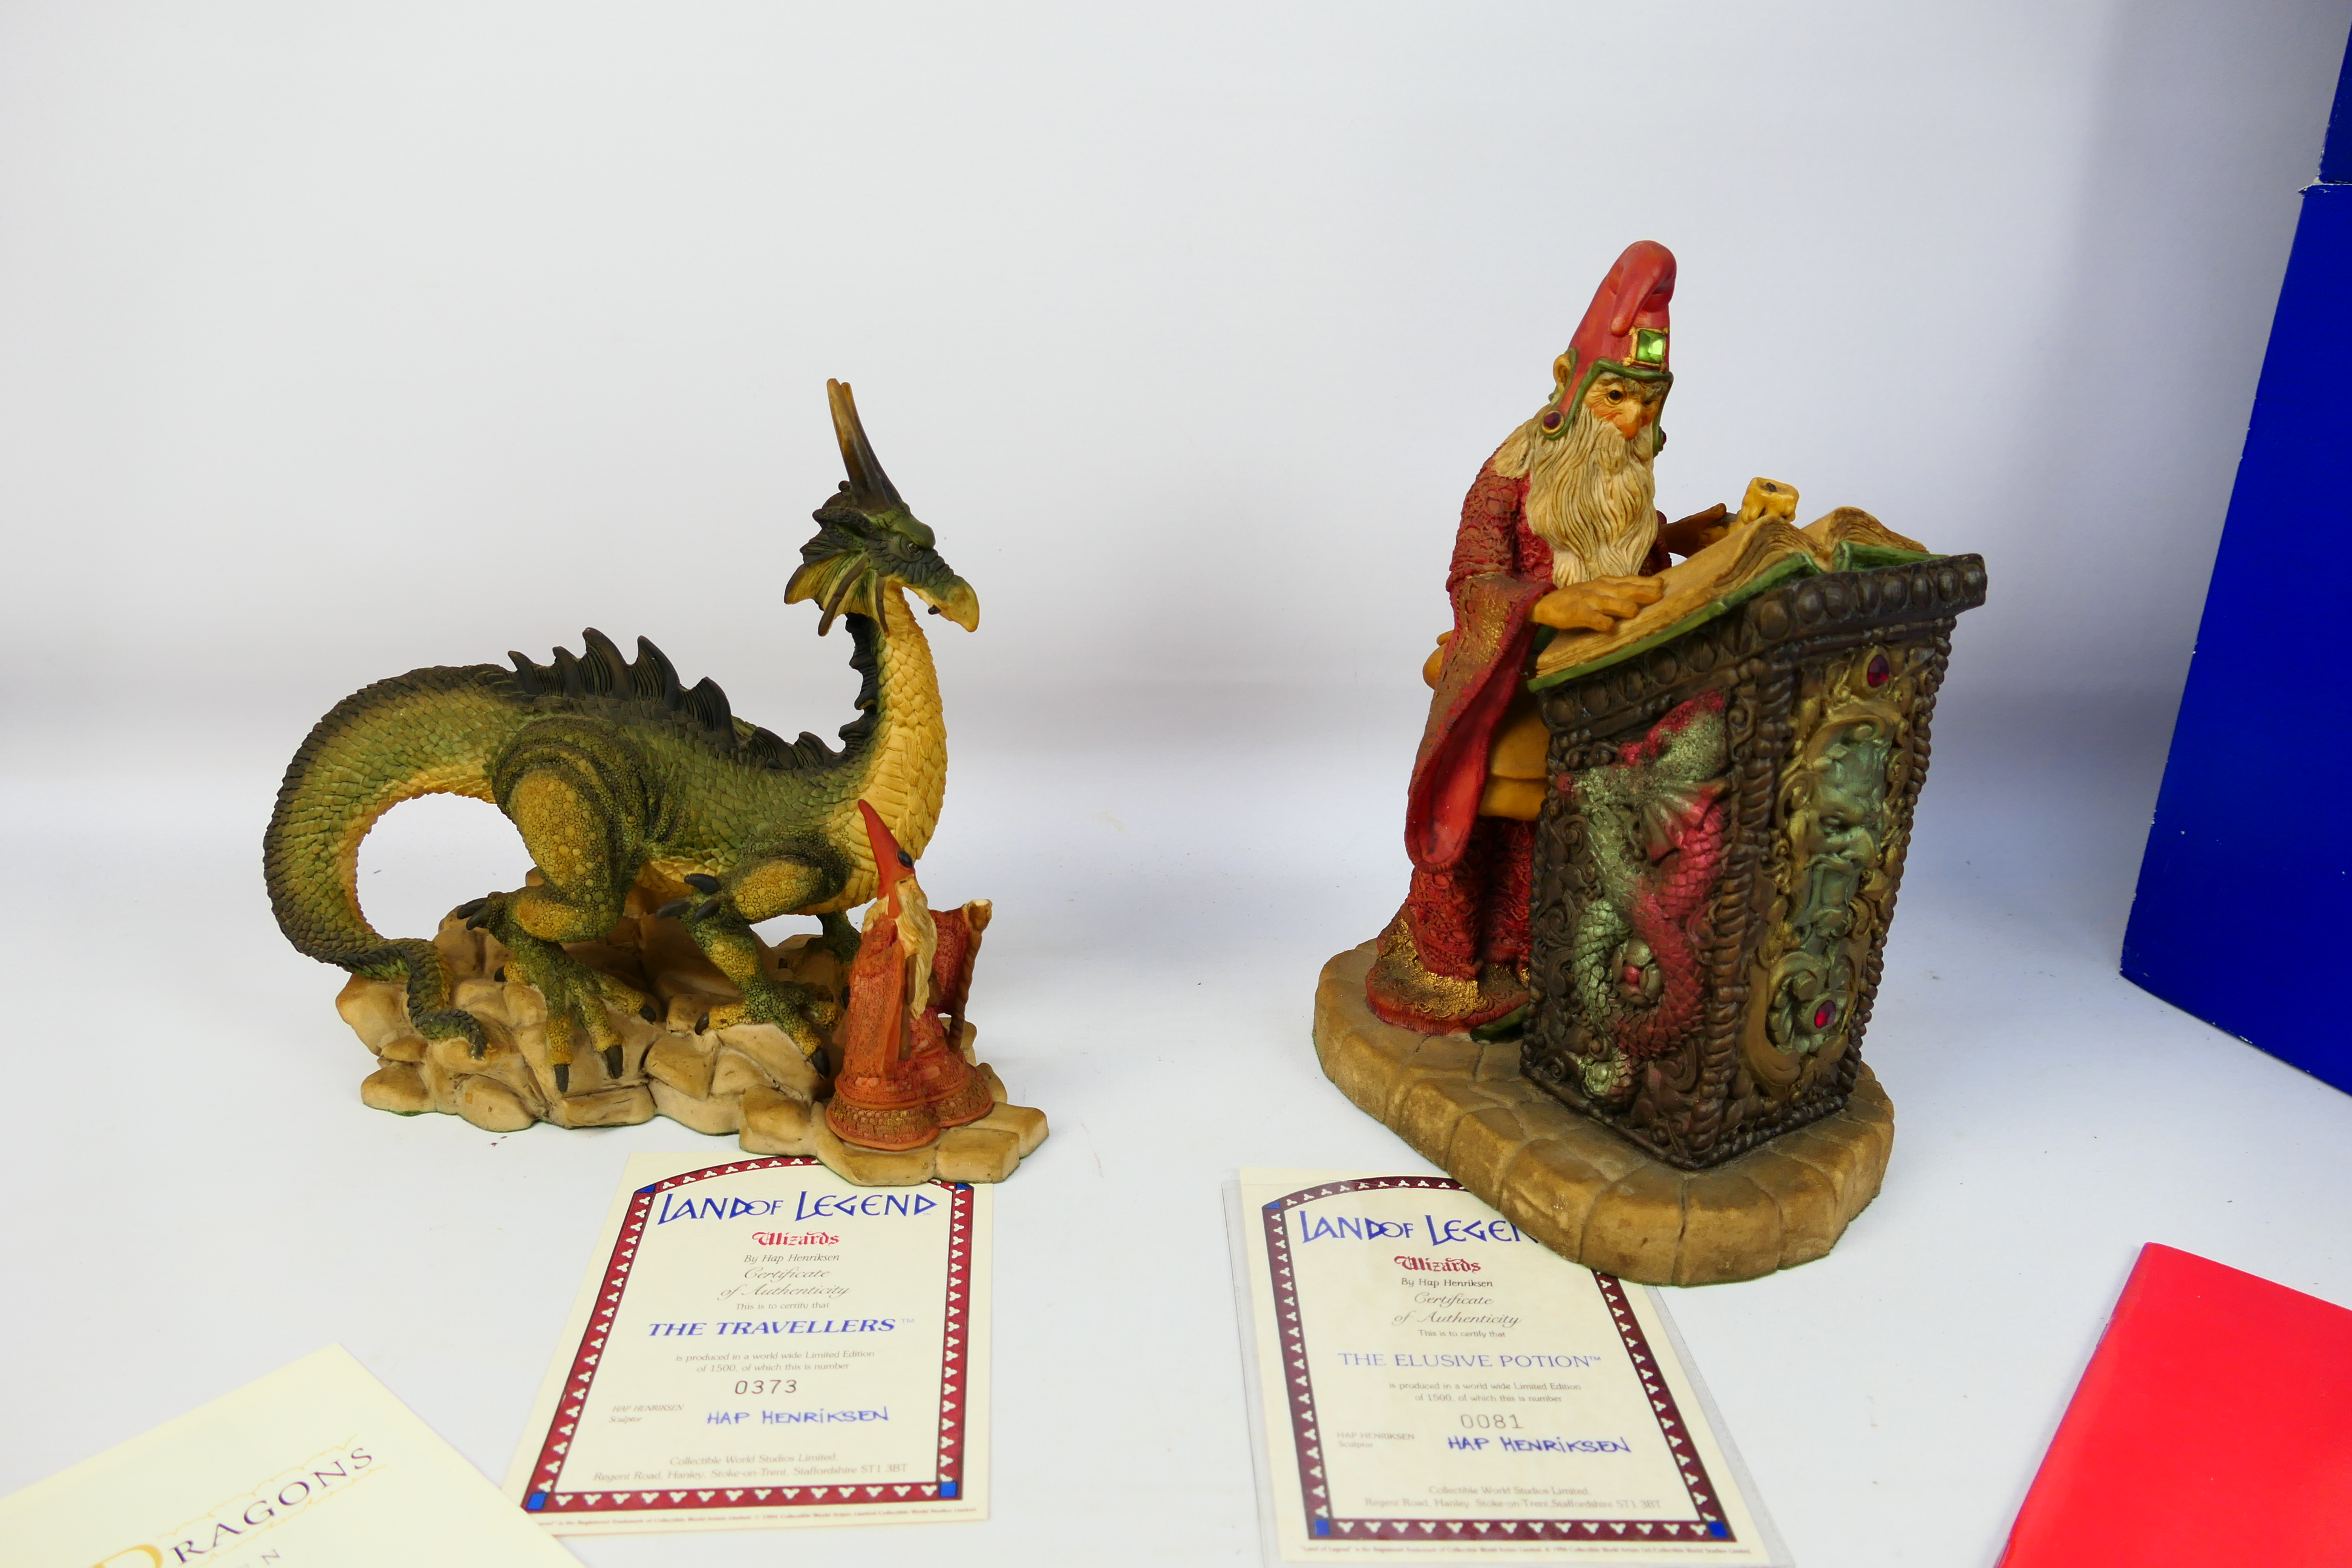 Wizards & Dragons - Two boxed limited edition fantasy figures designed by Hap Henriksen comprising